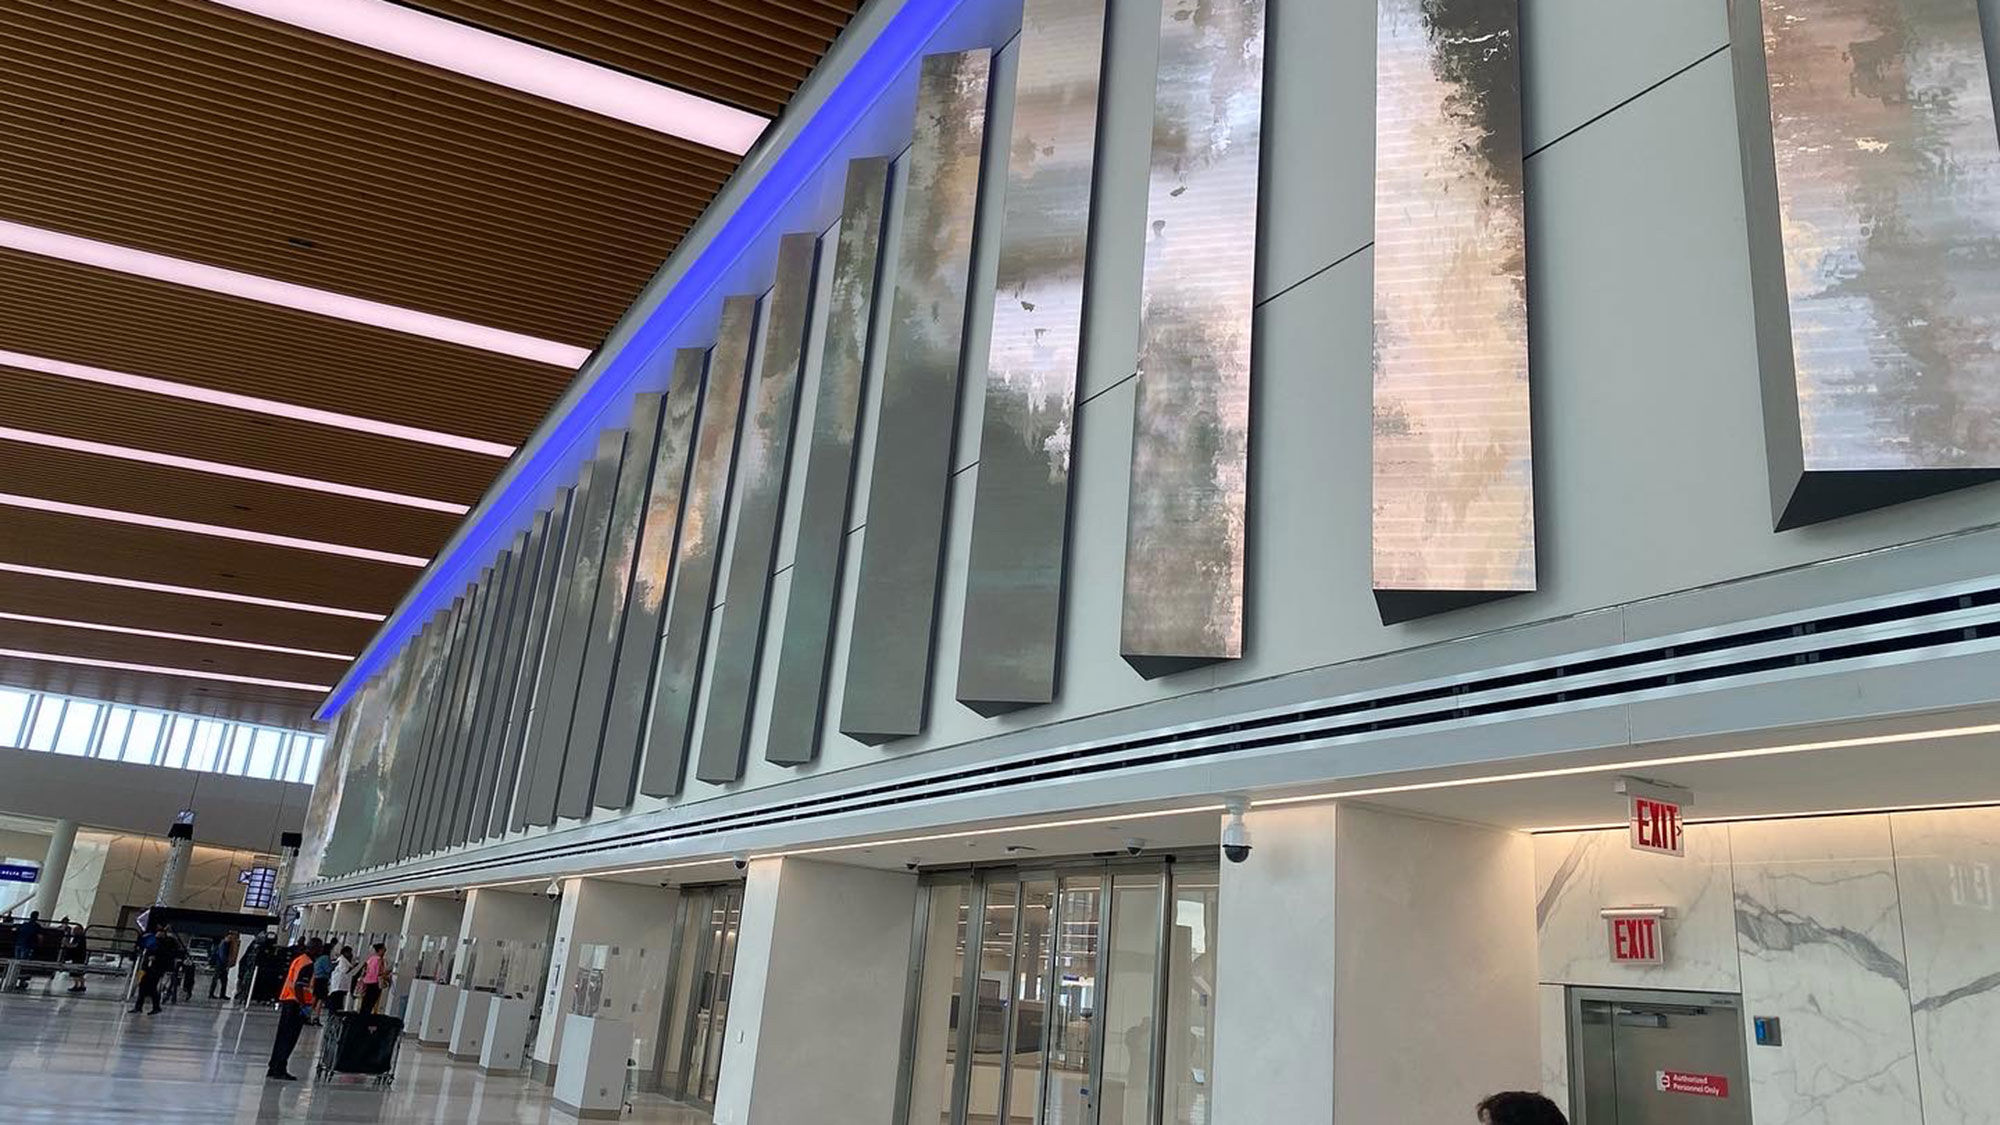 Vertical digital display panels will track flight departures in the TSA security hall.